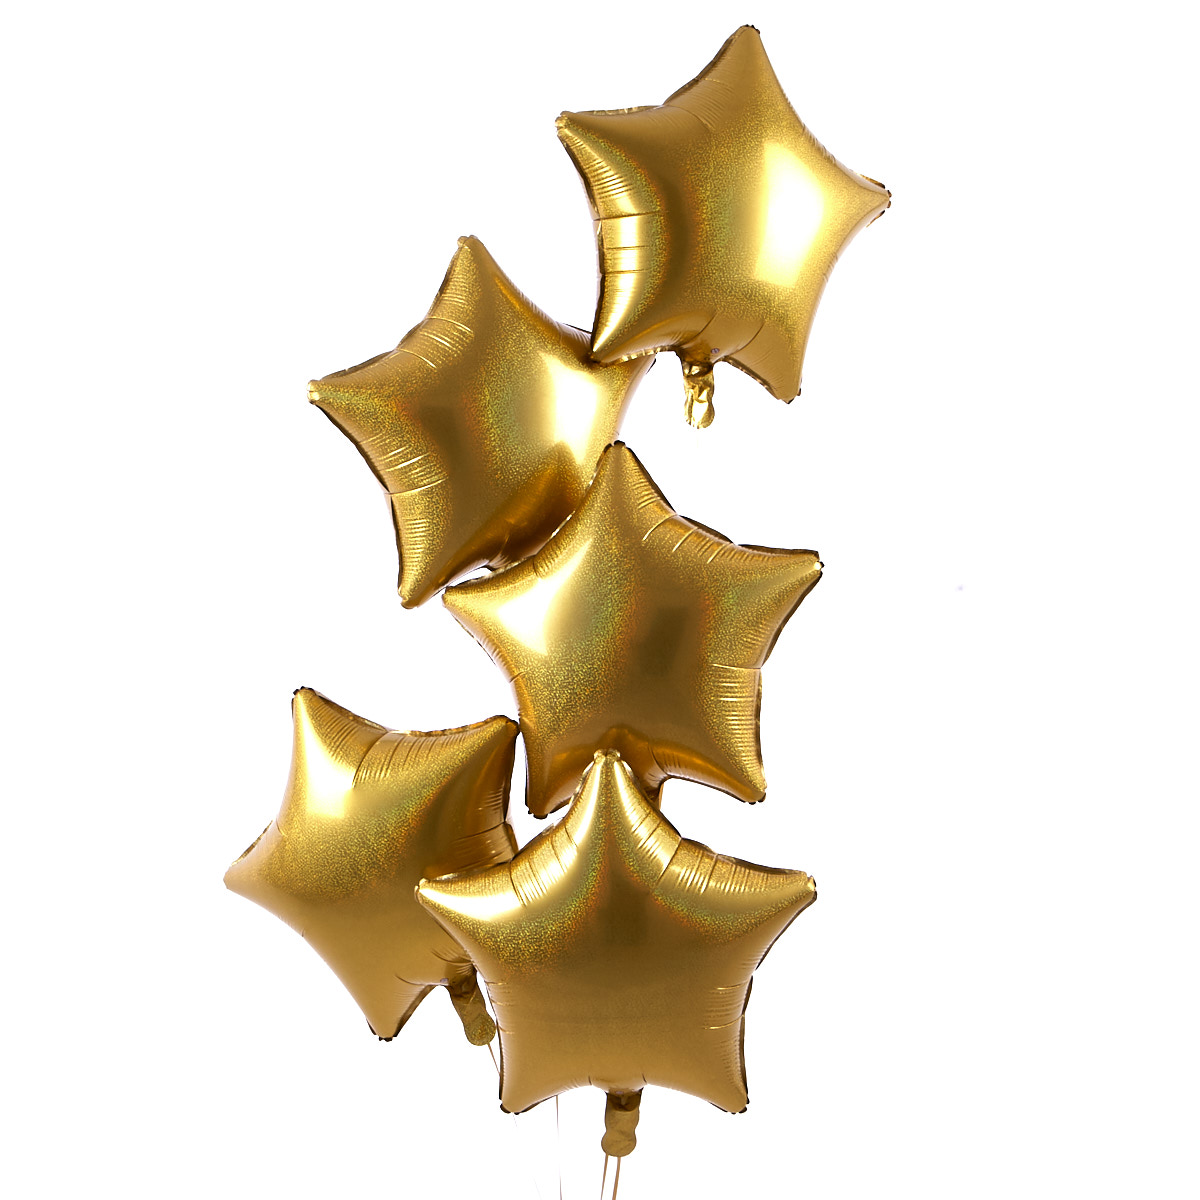 5 Gold Stars Stars Balloon Bouquet - DELIVERED INFLATED!